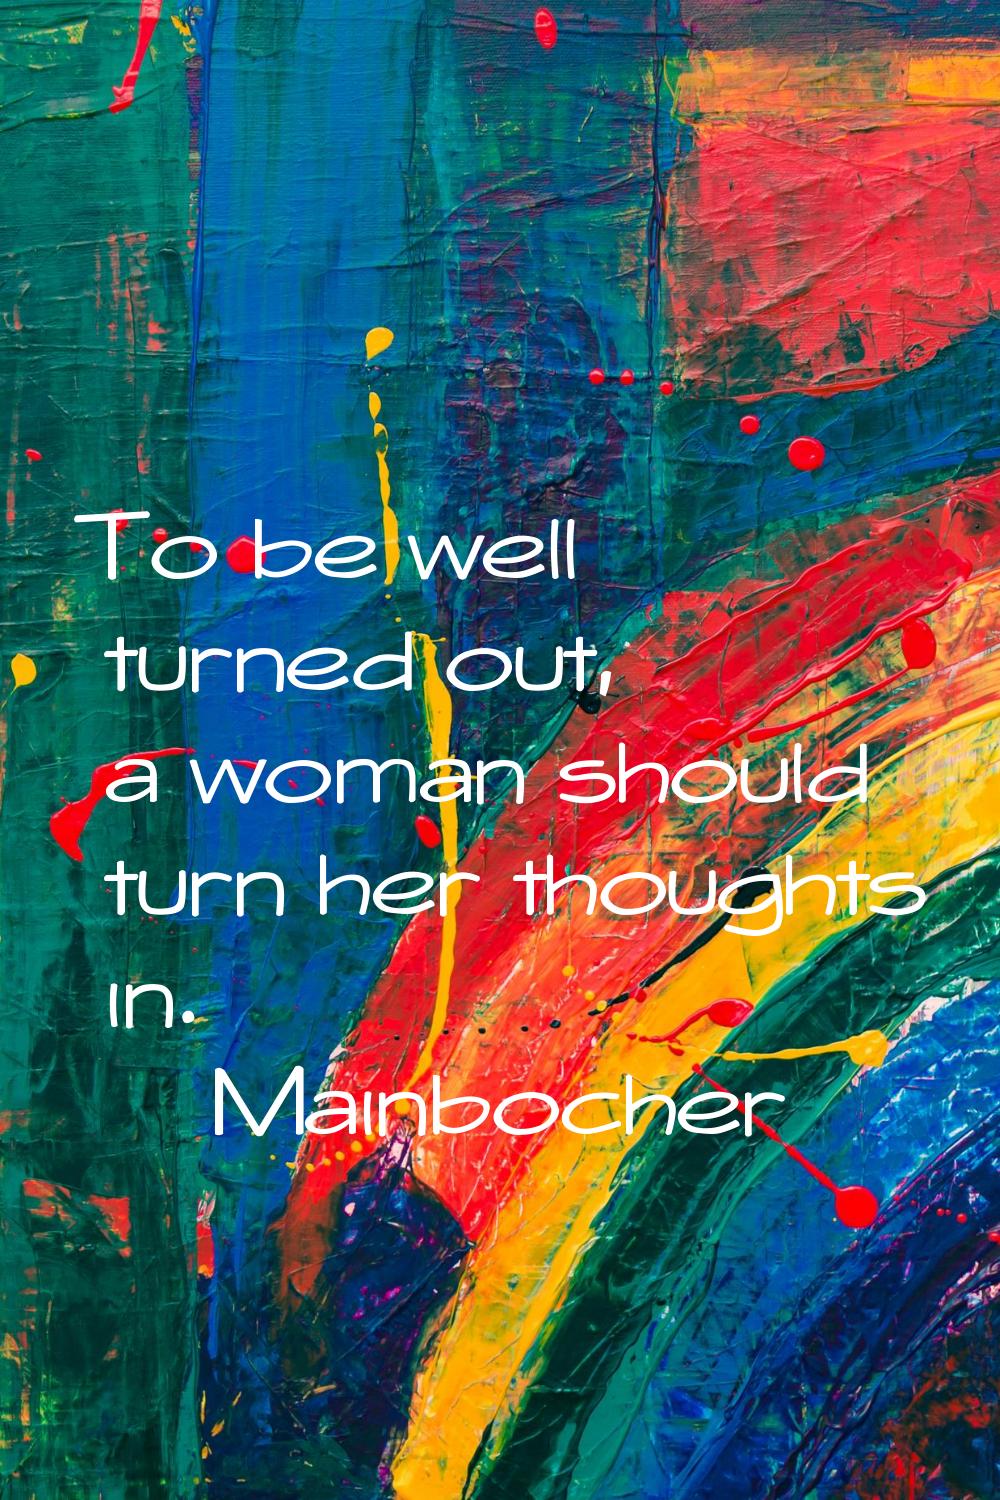 To be well turned out, a woman should turn her thoughts in.